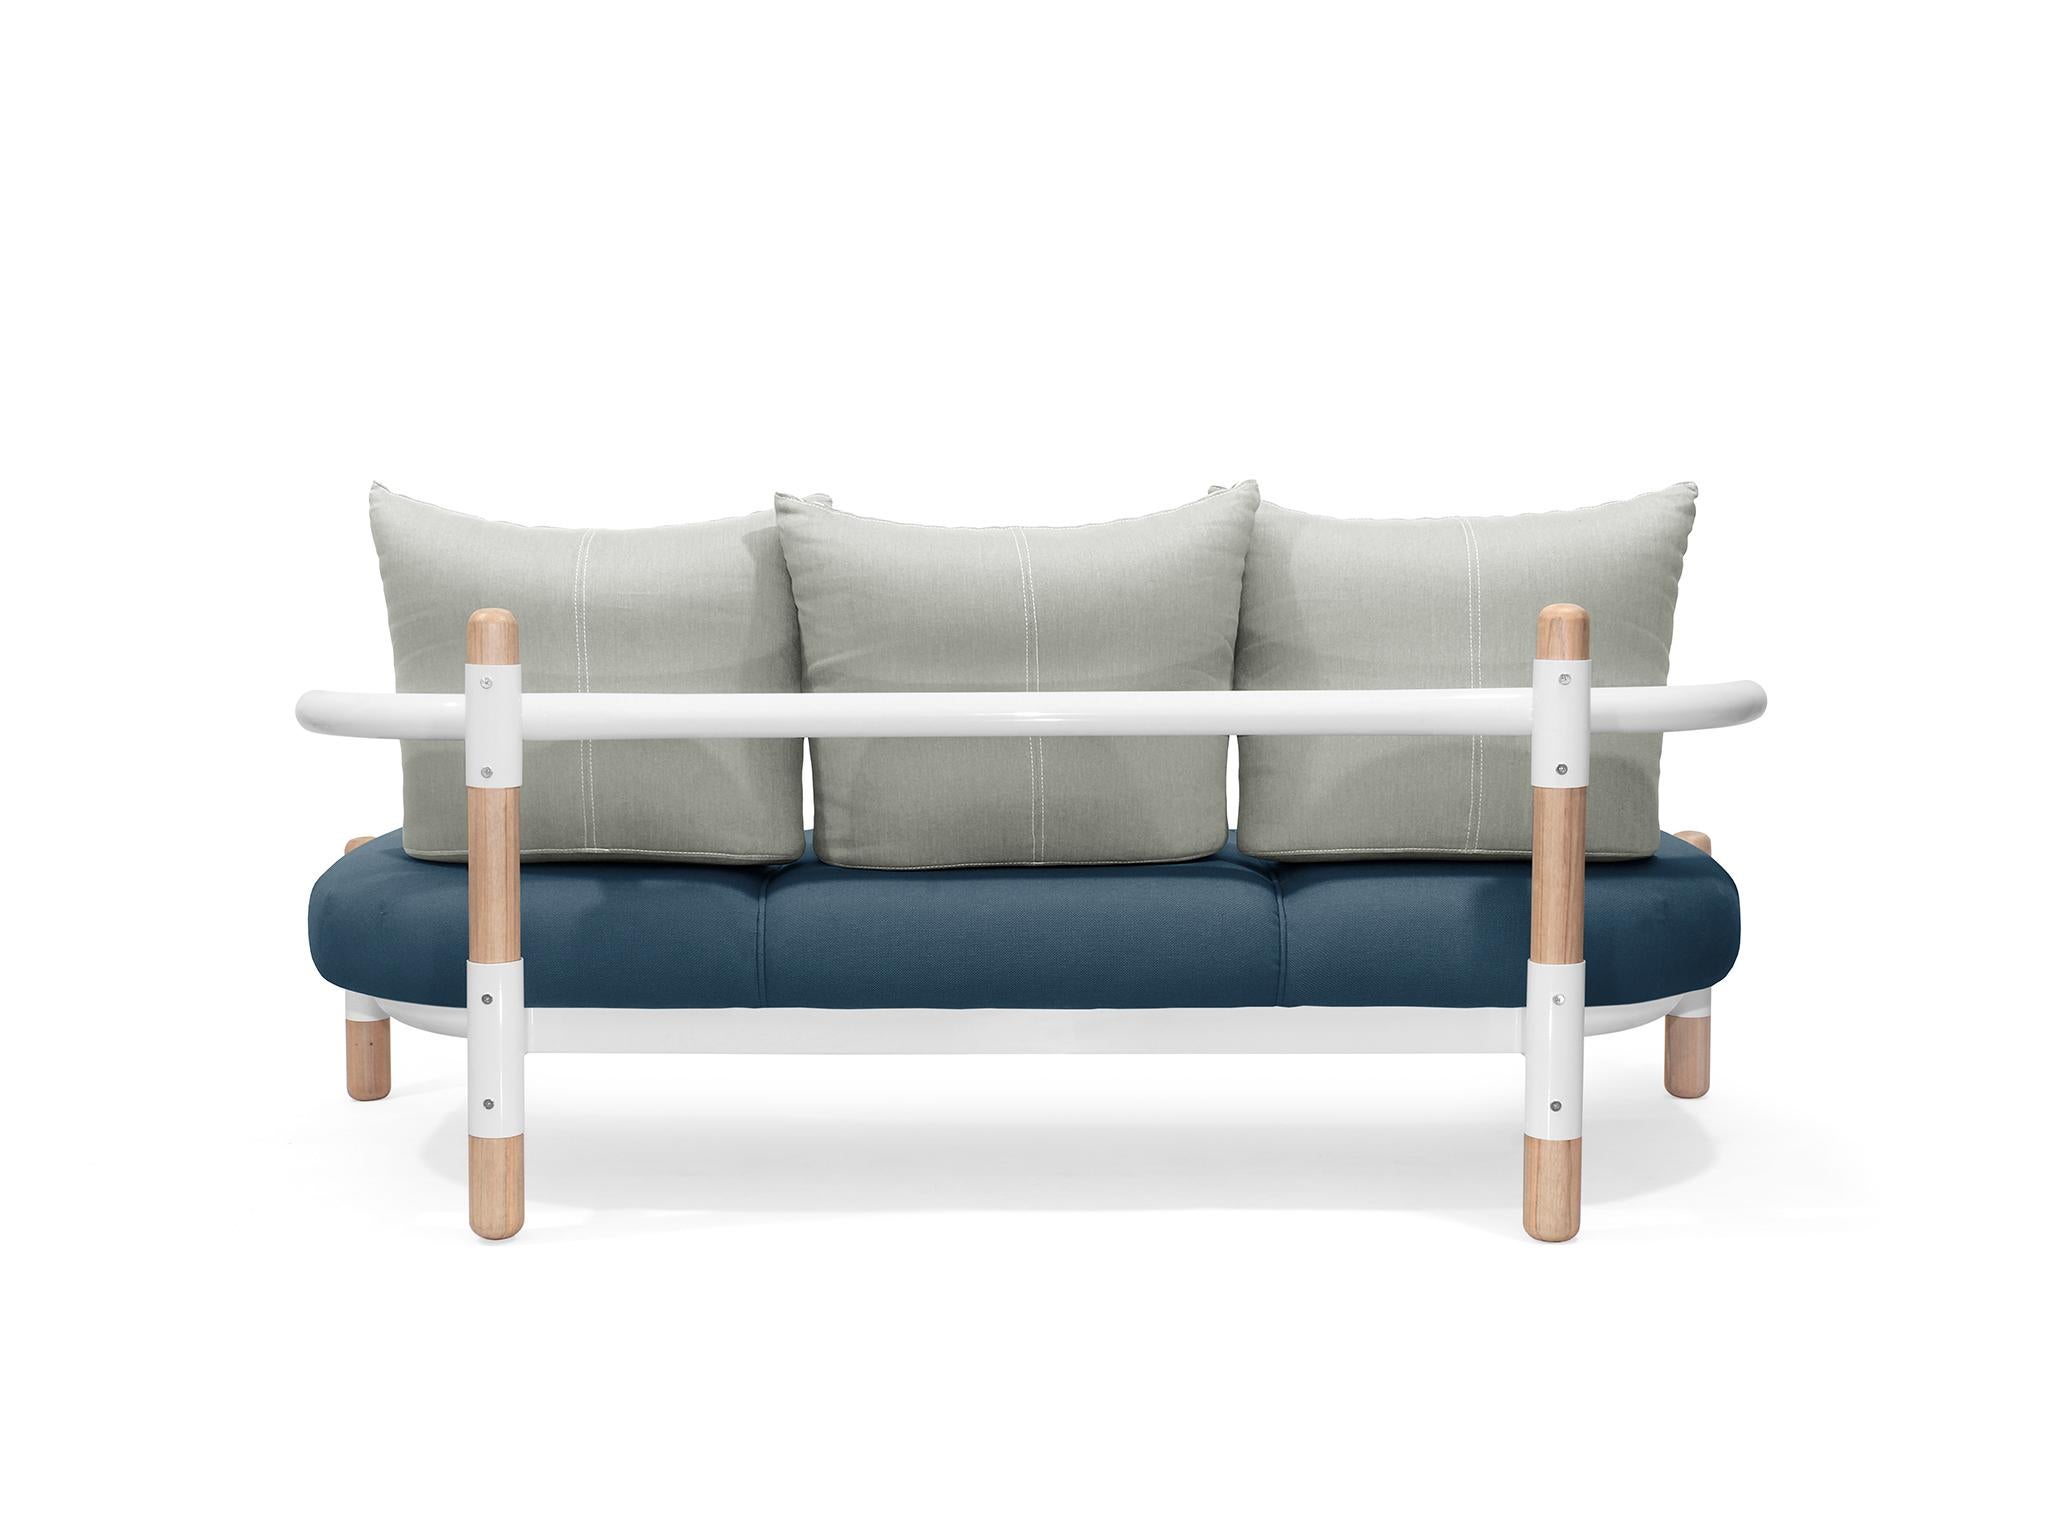 Brazilian Blue PK15 Three-Seat Sofa, Carbon Steel Structure and Wood Legs by Paulo Kobylka For Sale